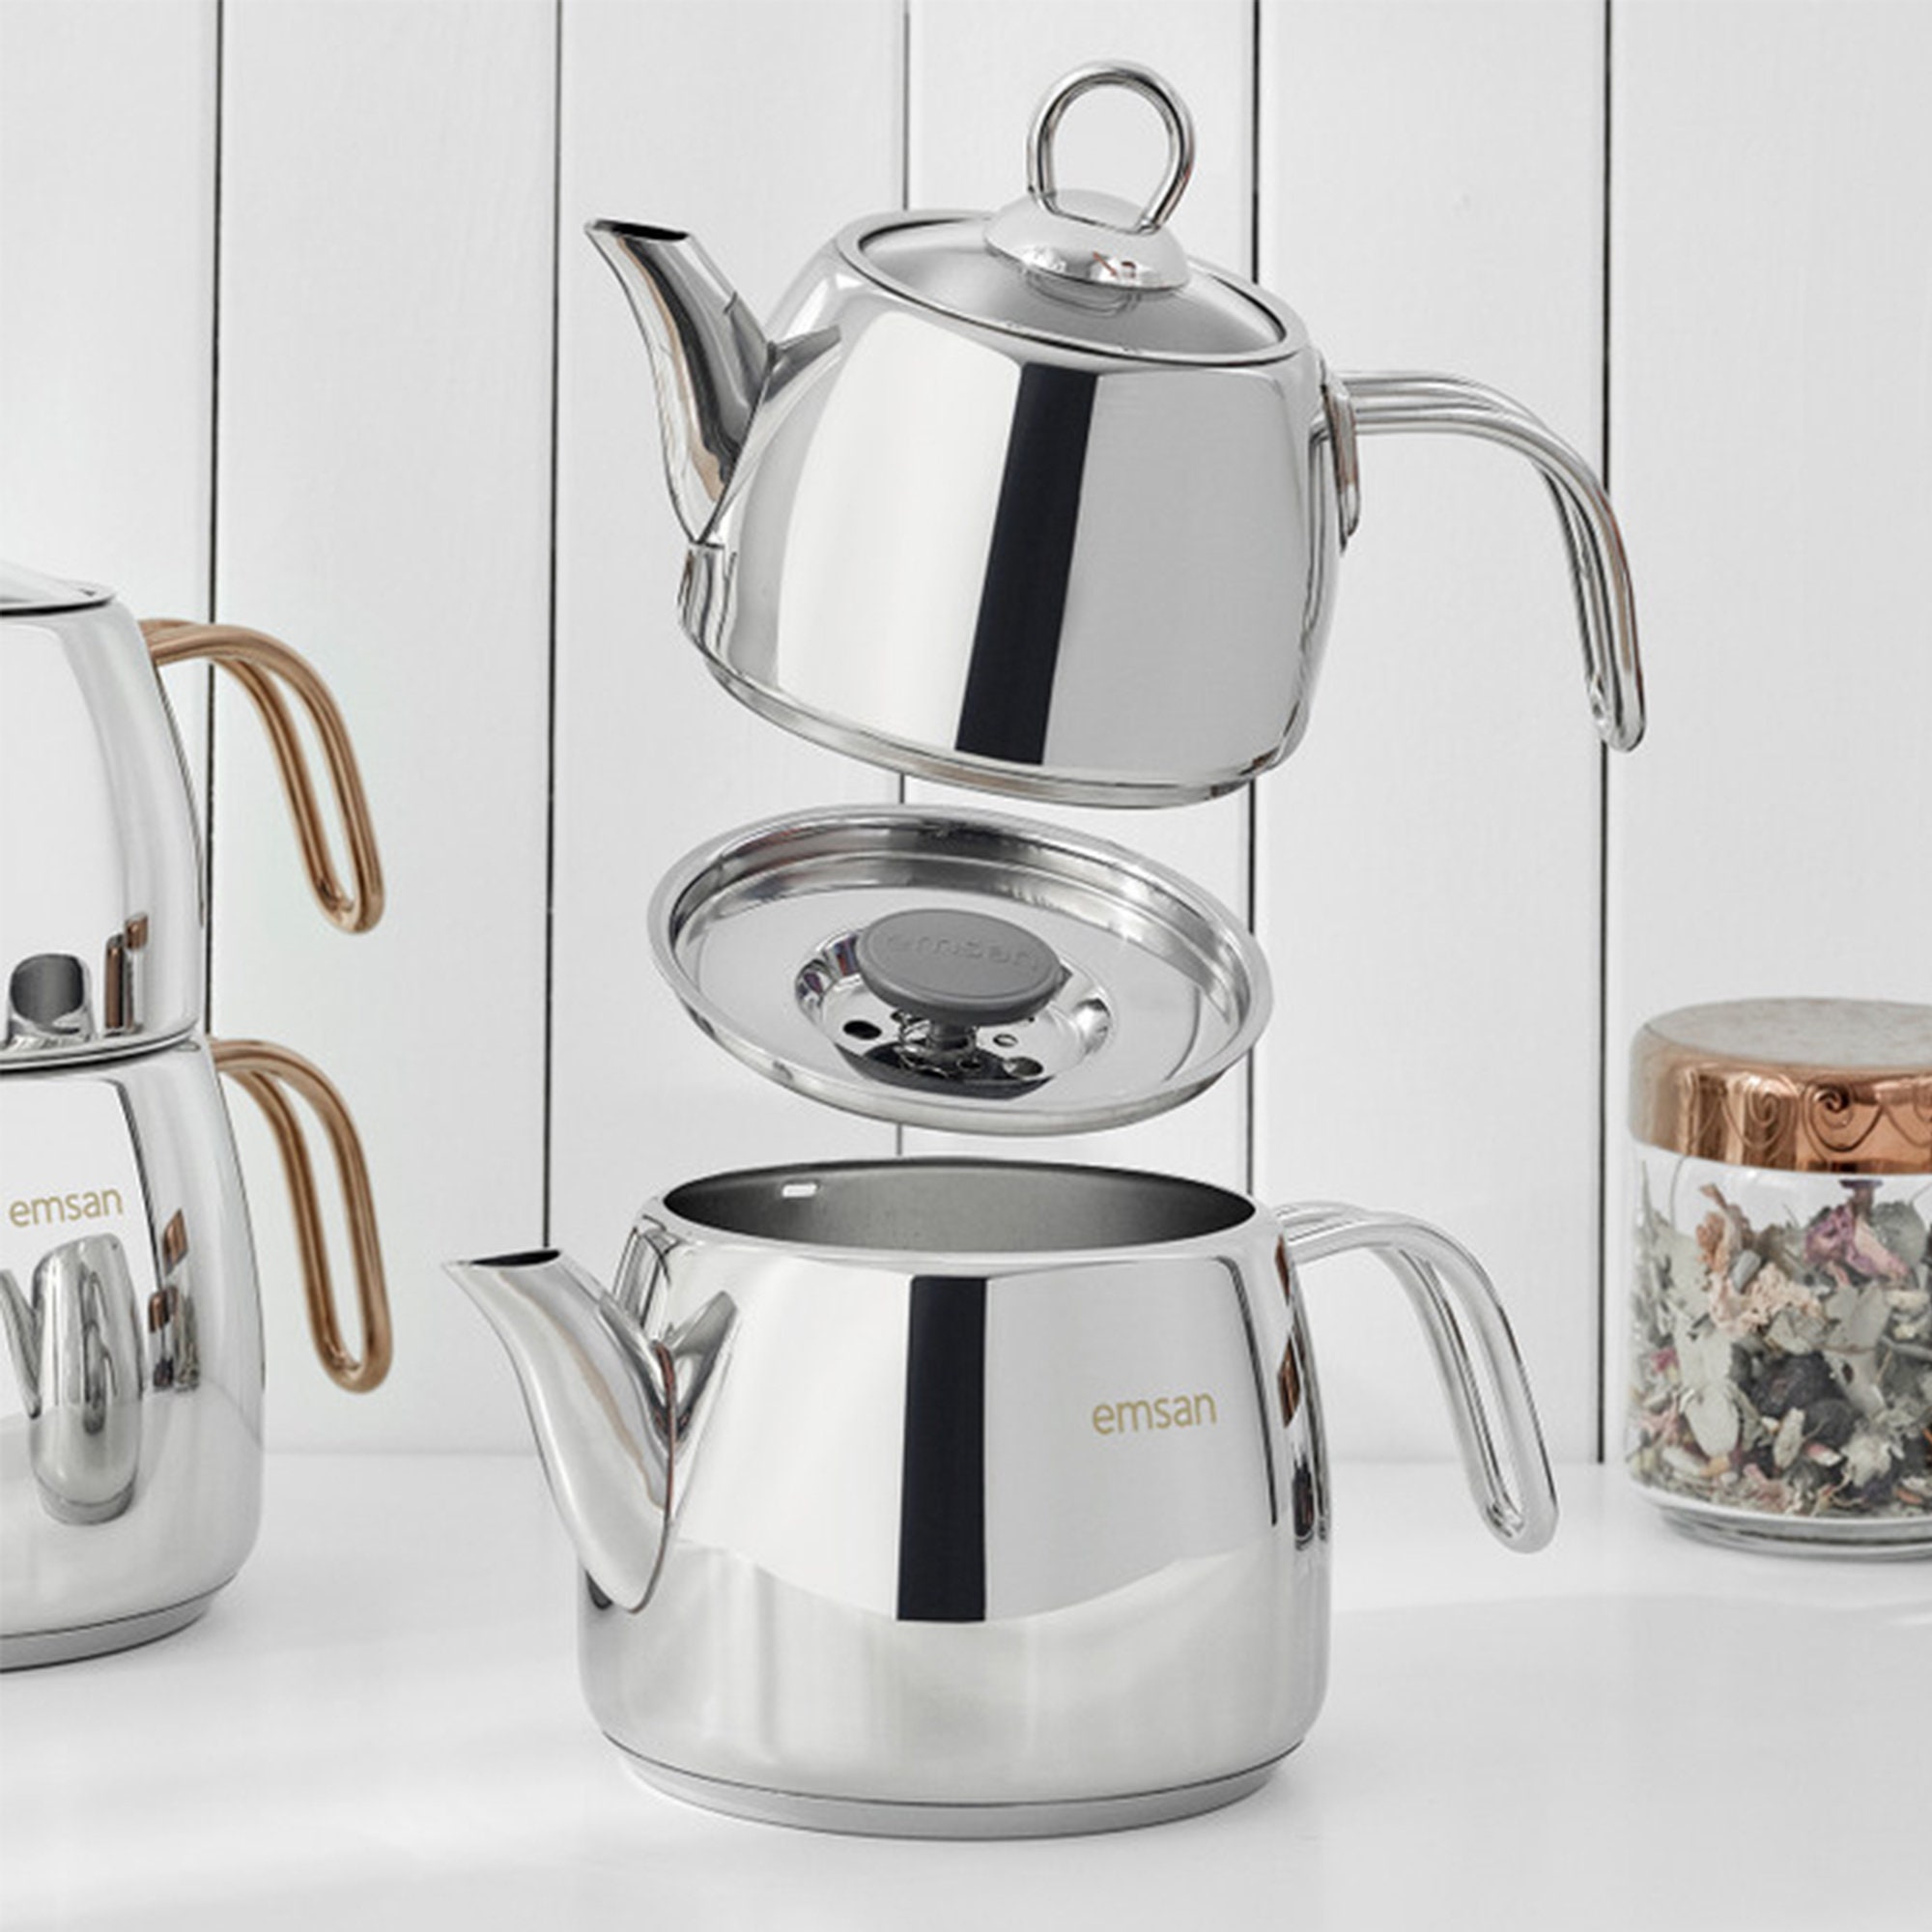 Serenk Stainless Steel Turkish Caydanlik Teapot Set, Stovetop Tea Pot with  Dual Compartments, Ideal for Turkish Coffee & Tea Making, Wooden Looking